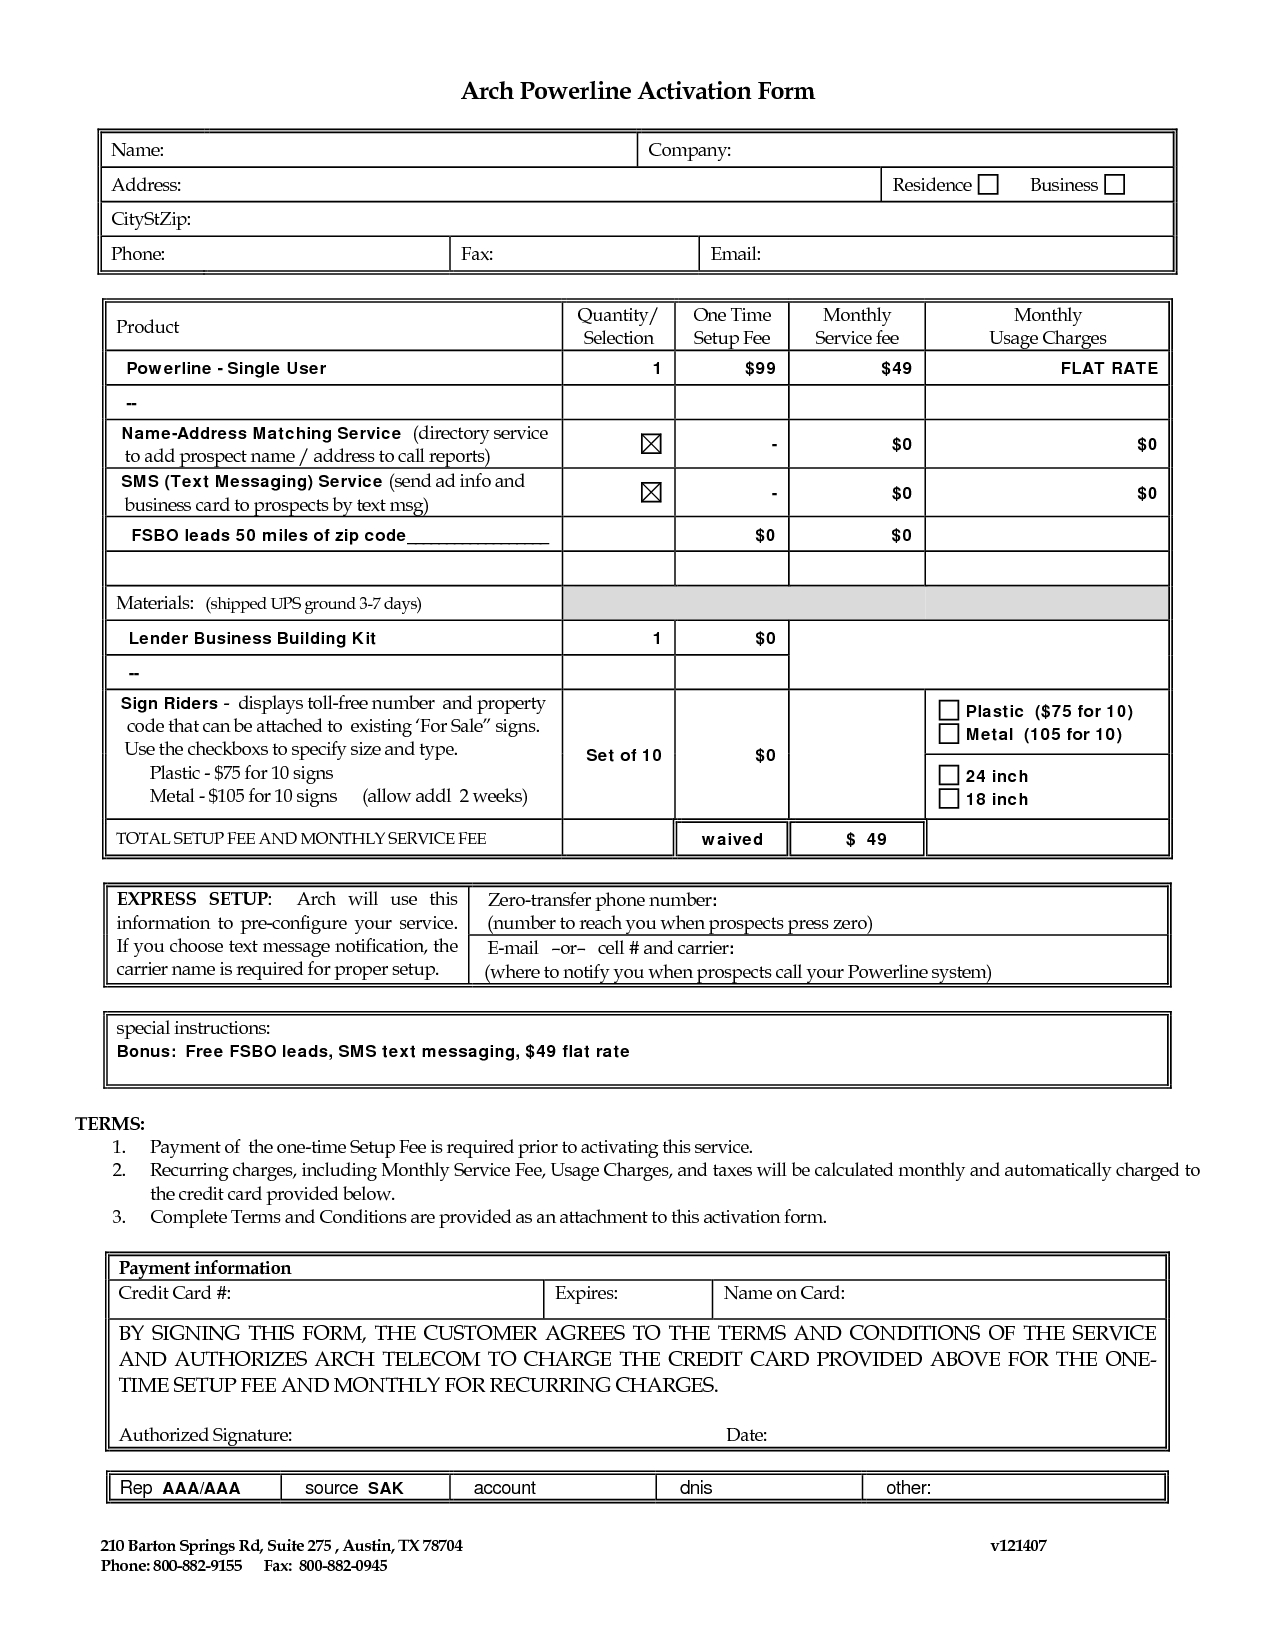 020 Sales Call Reporting Template Weekly Report 21554 Intended For Sales Rep Visit Report Template